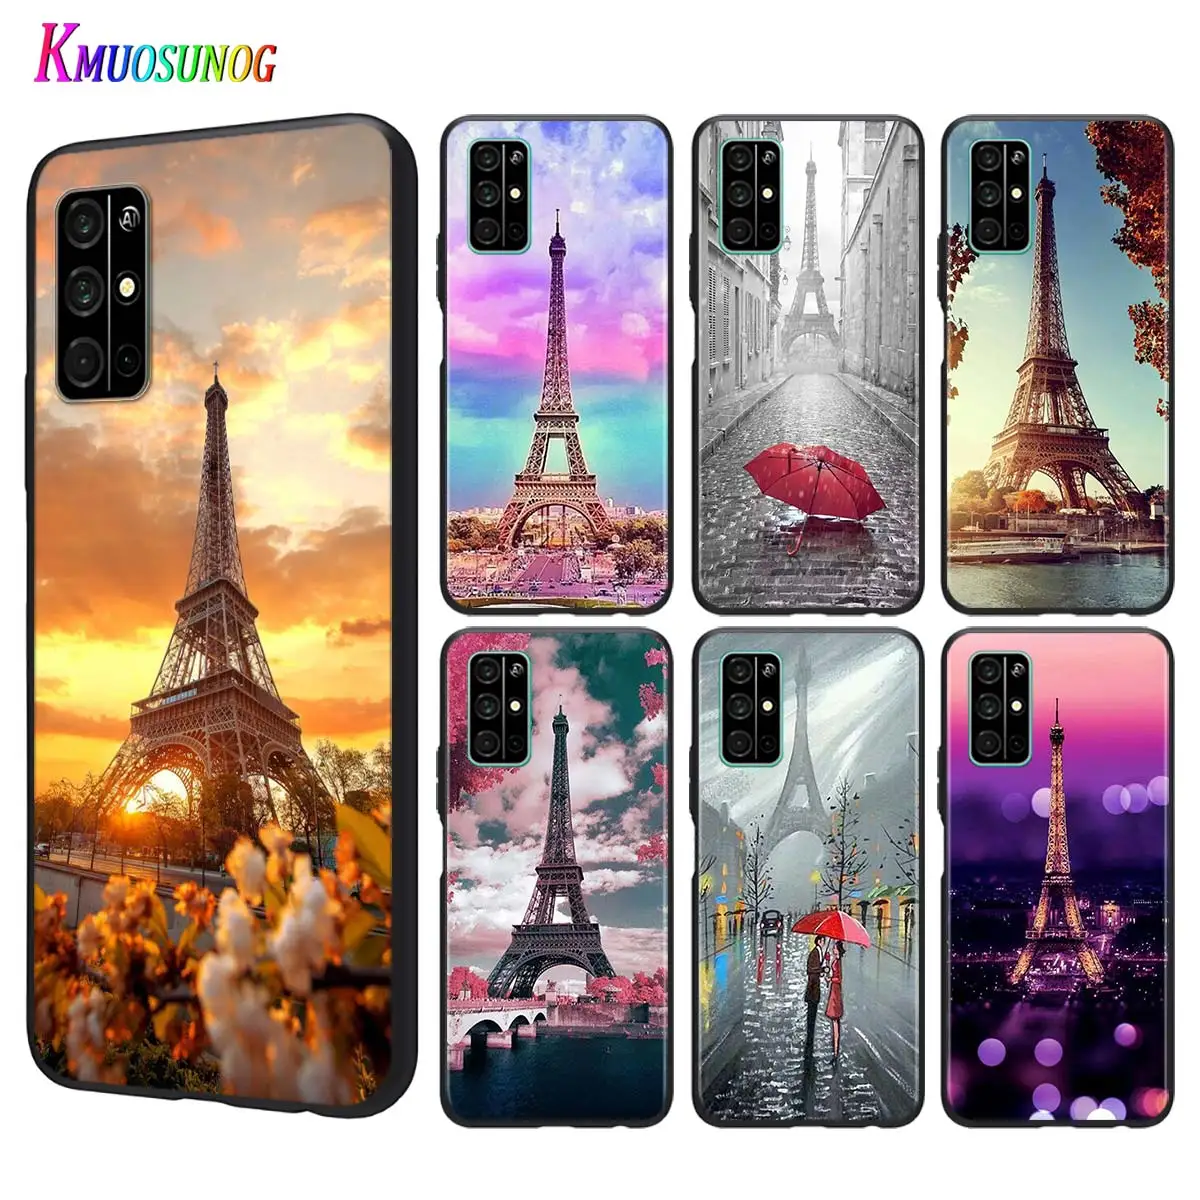 

Silicone Black Cover Paris Eiffel Tower France for Huawei Honor 9A 9C 9S 9X Lite 10 10i 20 V20 20S 30 Pro Lite Phone Case